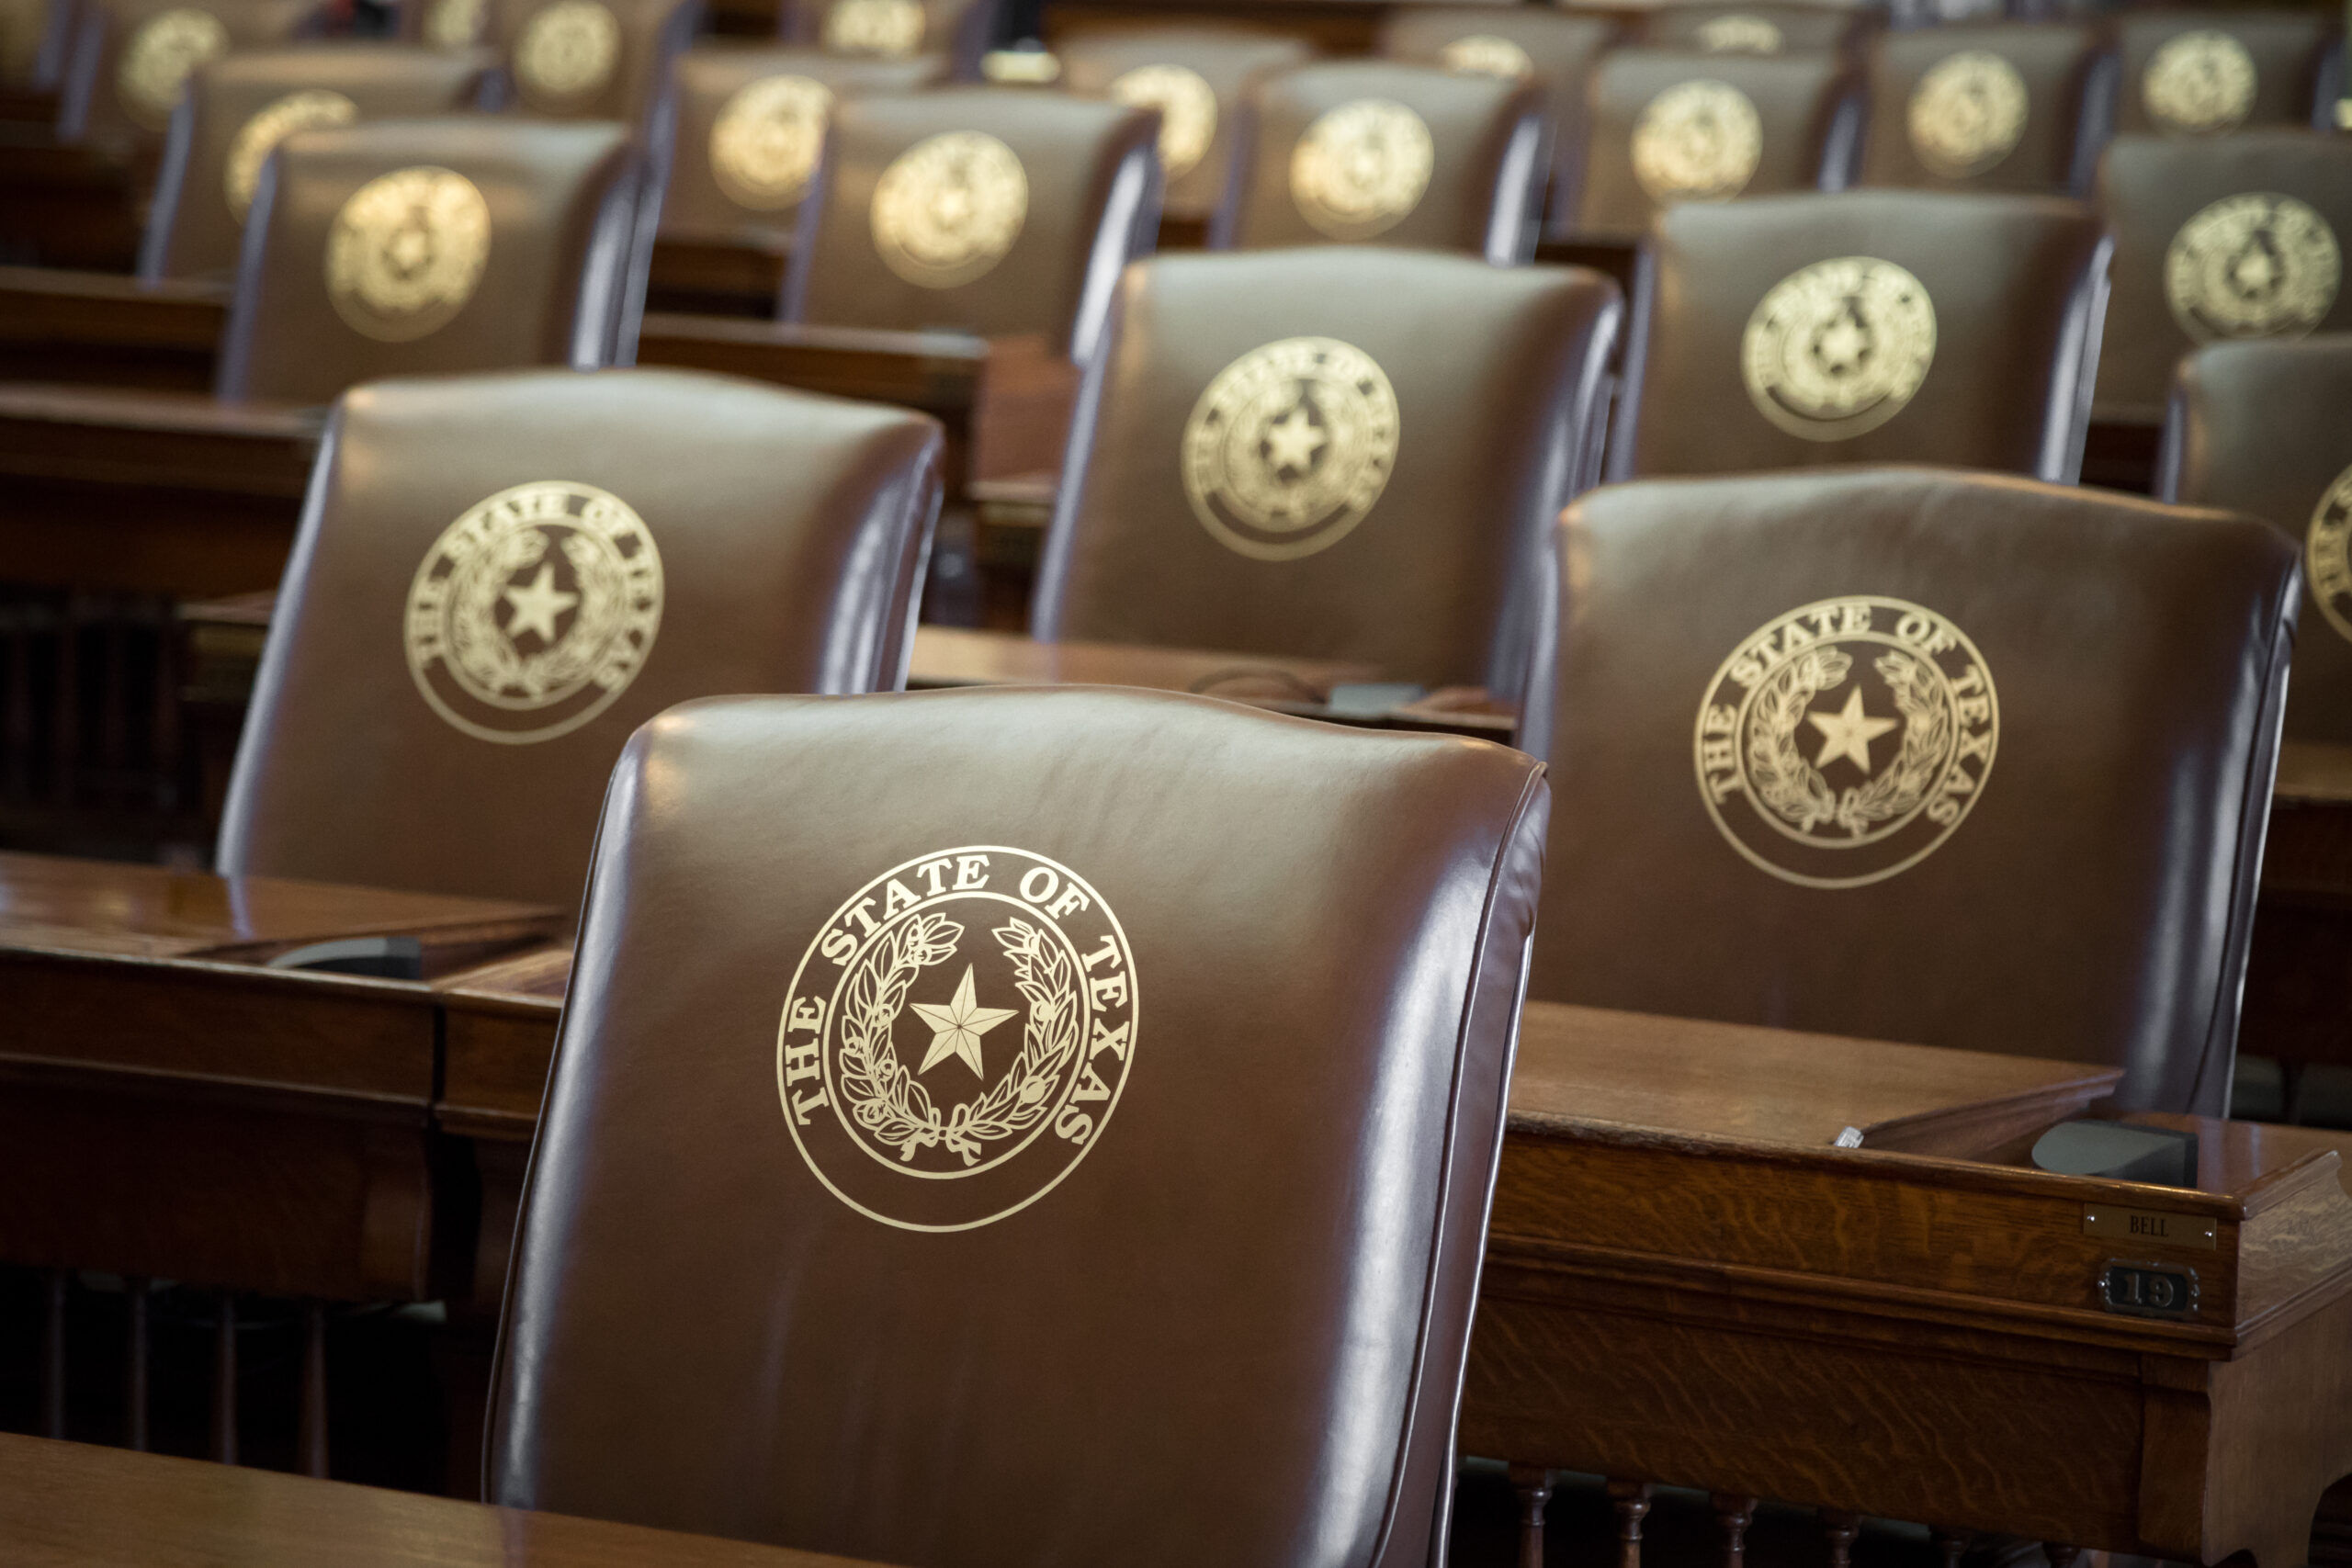 Rows of leather seats, with gold embossed The State of Texas and Lone Star seal, in the House of Representatives chambers at the capitol building